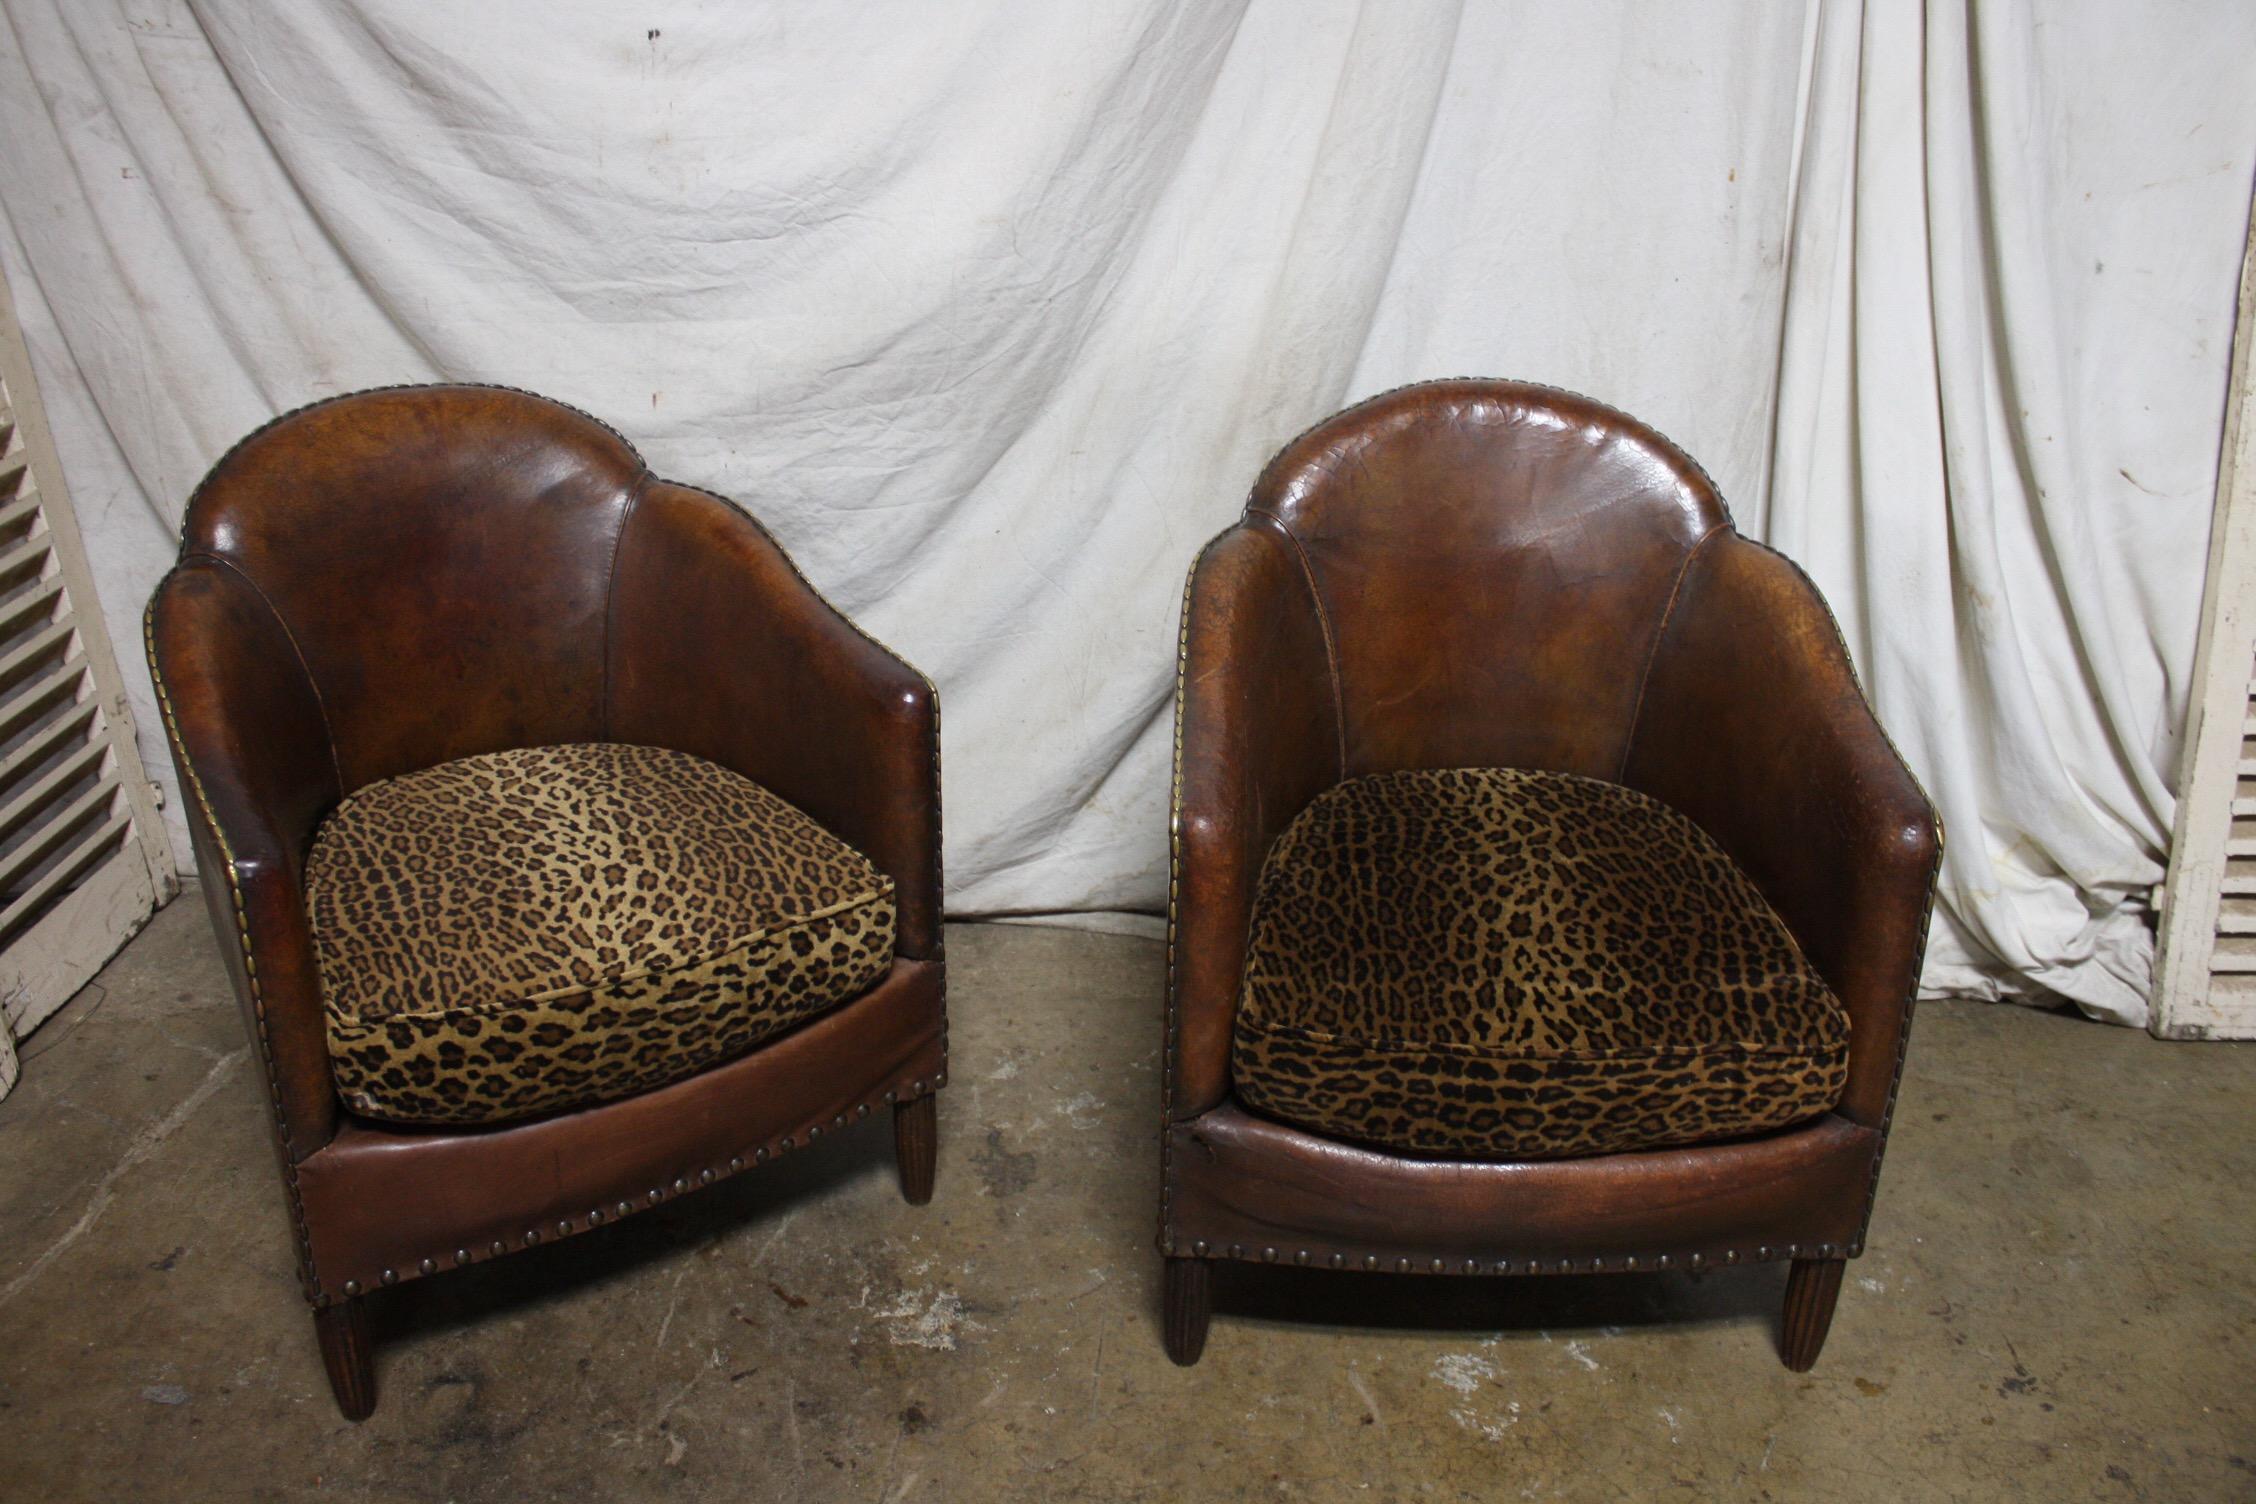 Beautiful pair of Art Deco club chairs, the leather has a wonderful patine, a lot of character.